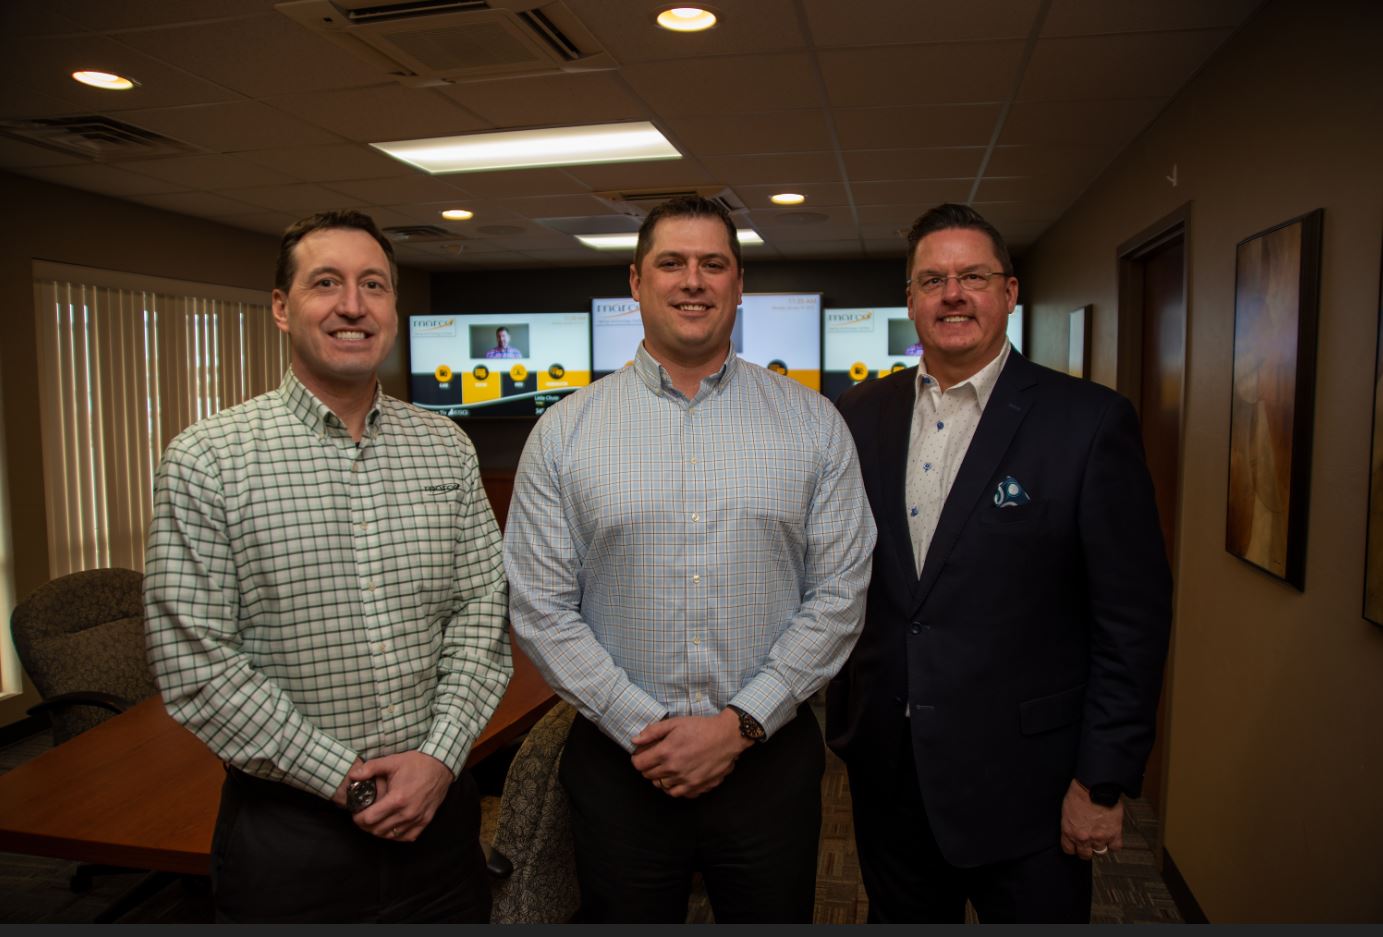 Pictured Left to Right: Jonathan Warrey, Chief Operating Officer, Marco, Jake Vande Hey, Director of IT Sales, Marco (formerly ESG), Todd Erne, President of IT Division, Marco